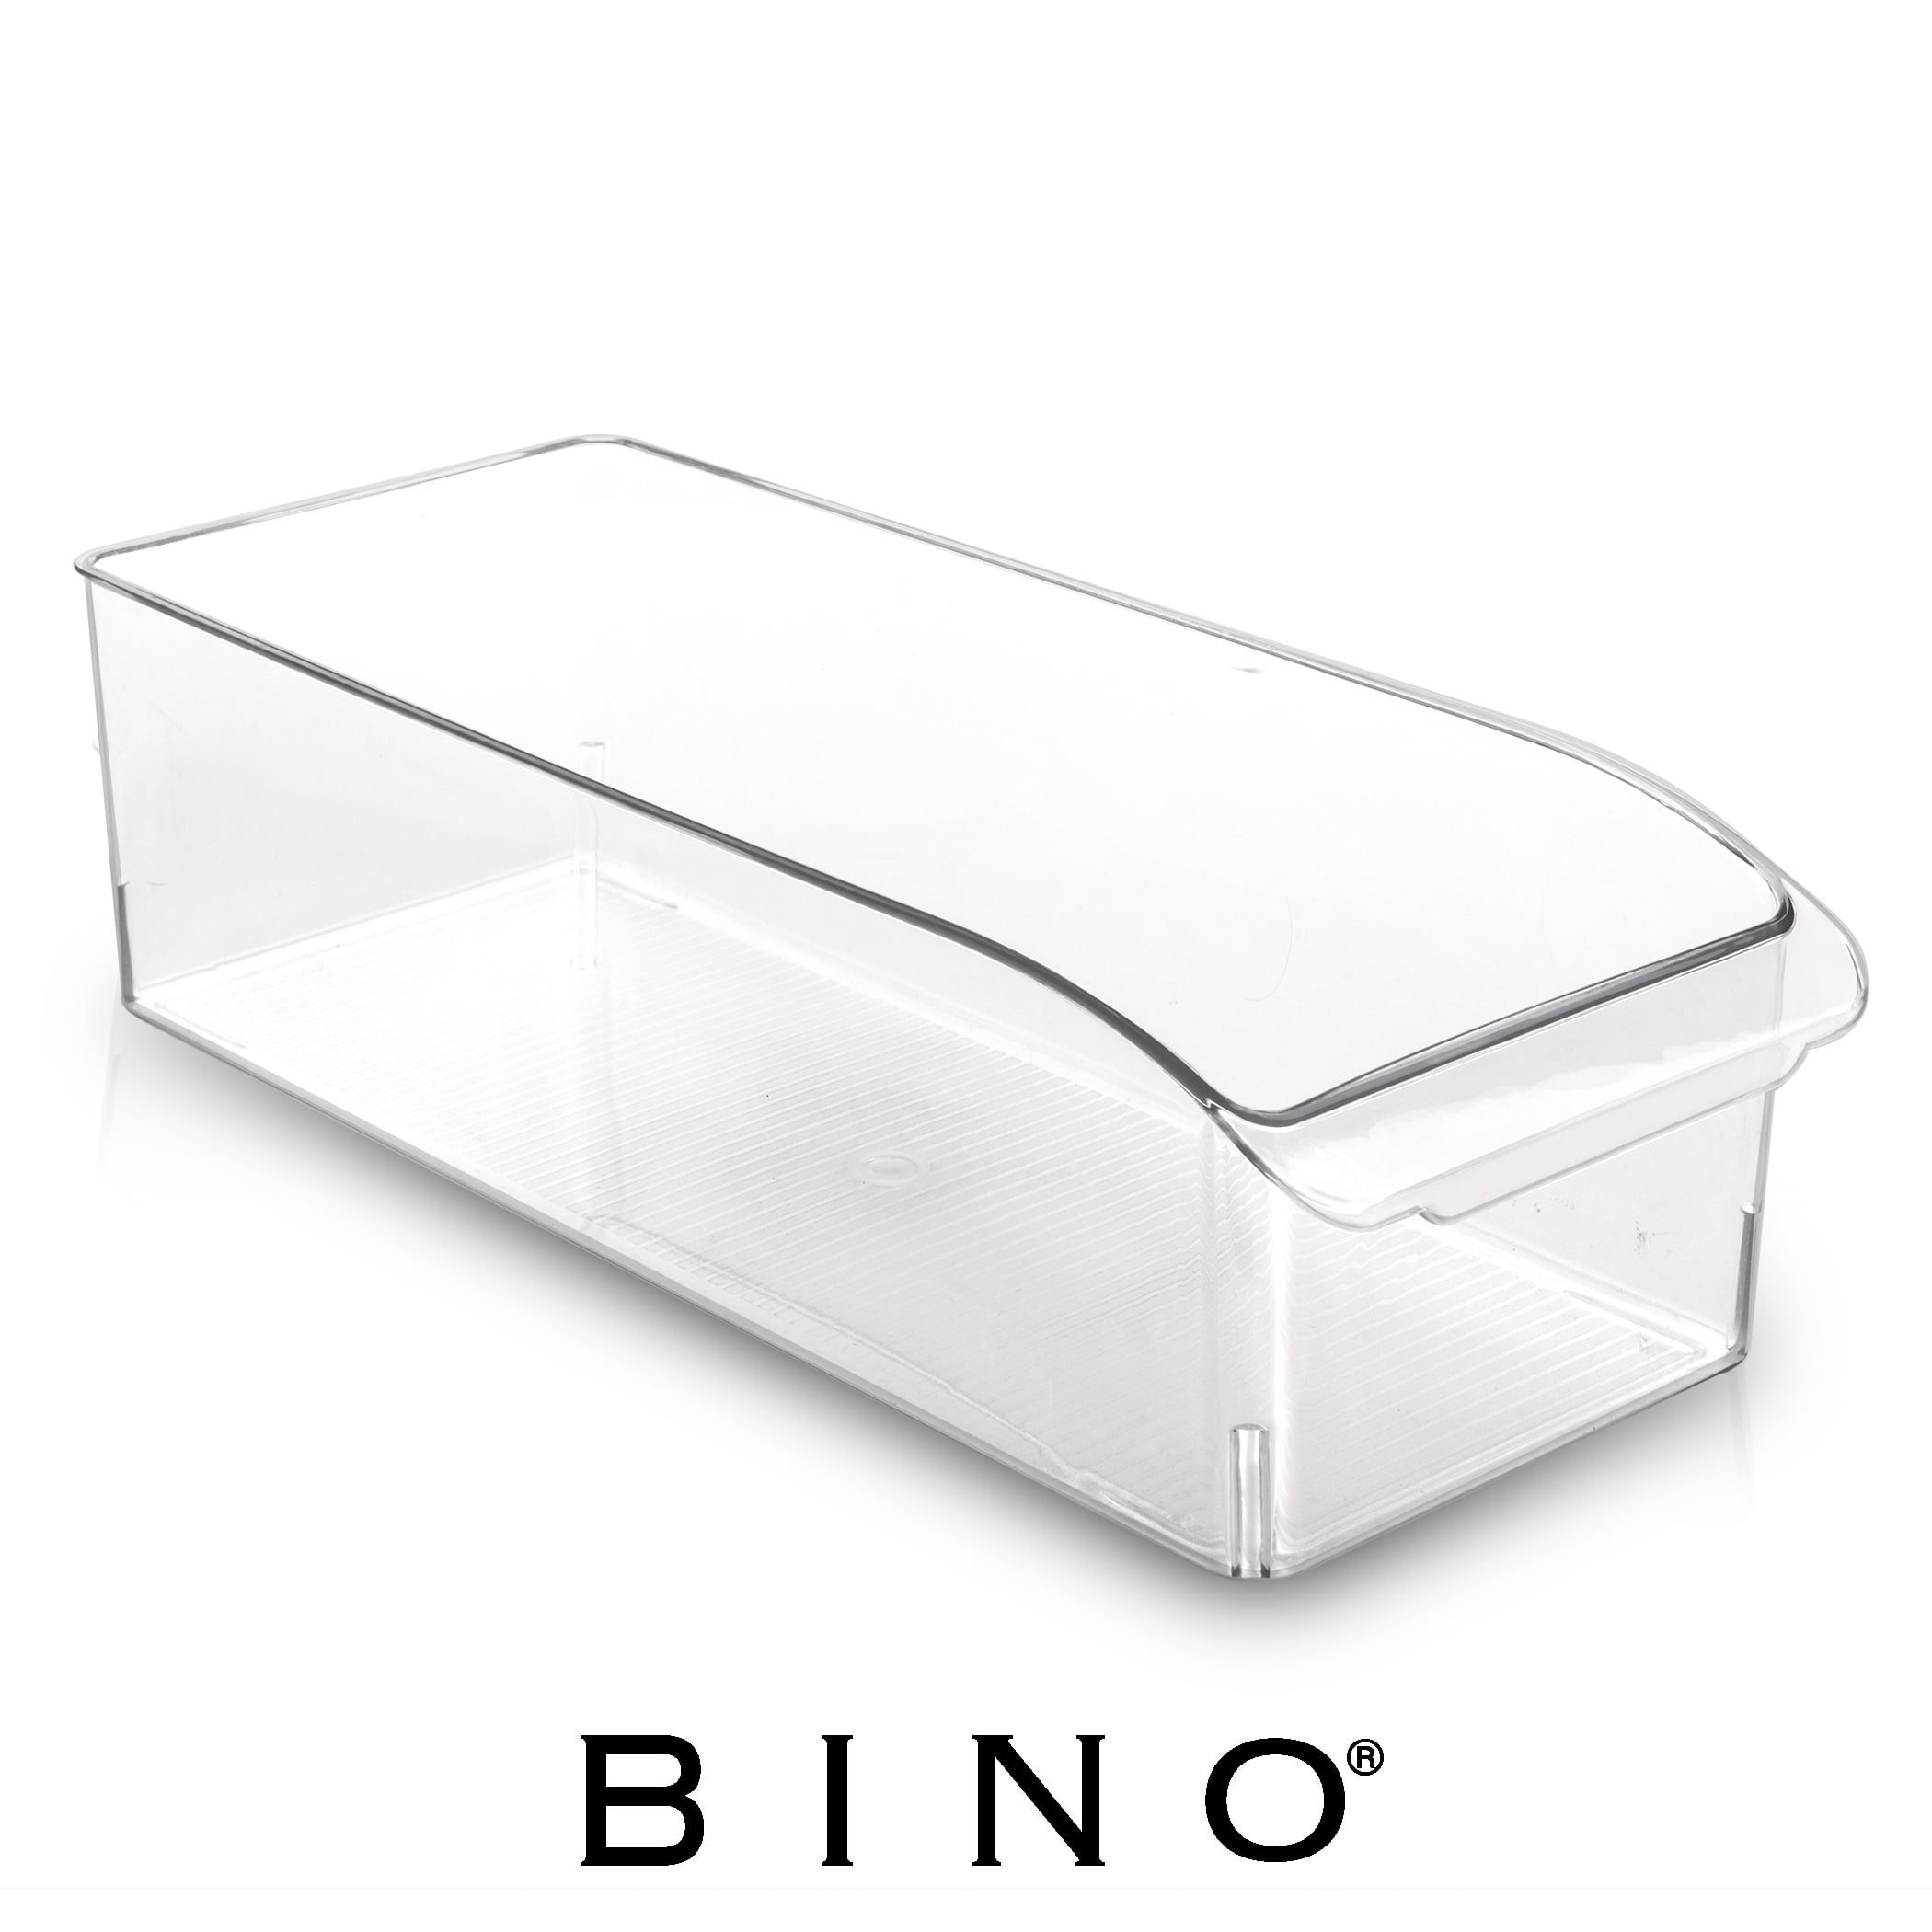 Large Clear and Transparent Plastic Scoop Front Container for Home and Kitchen BINO Stackable Refrigerator Freezer and Pantry Cabinet Storage Organizer Bin 